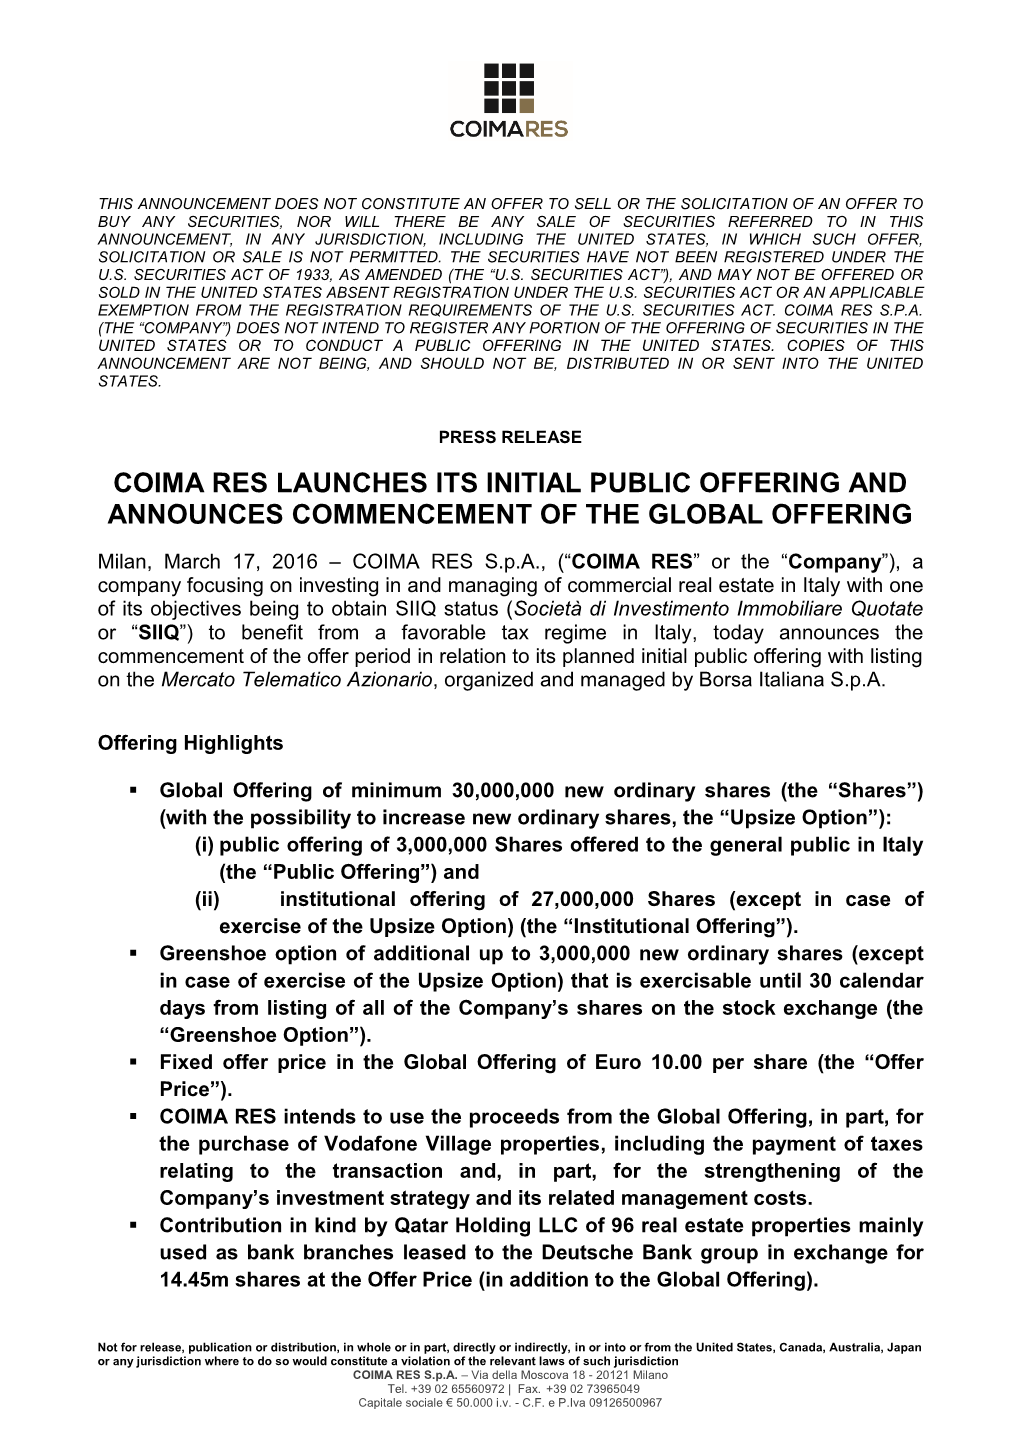 Coima Res Launches Its Initial Public Offering and Announces Commencement of the Global Offering